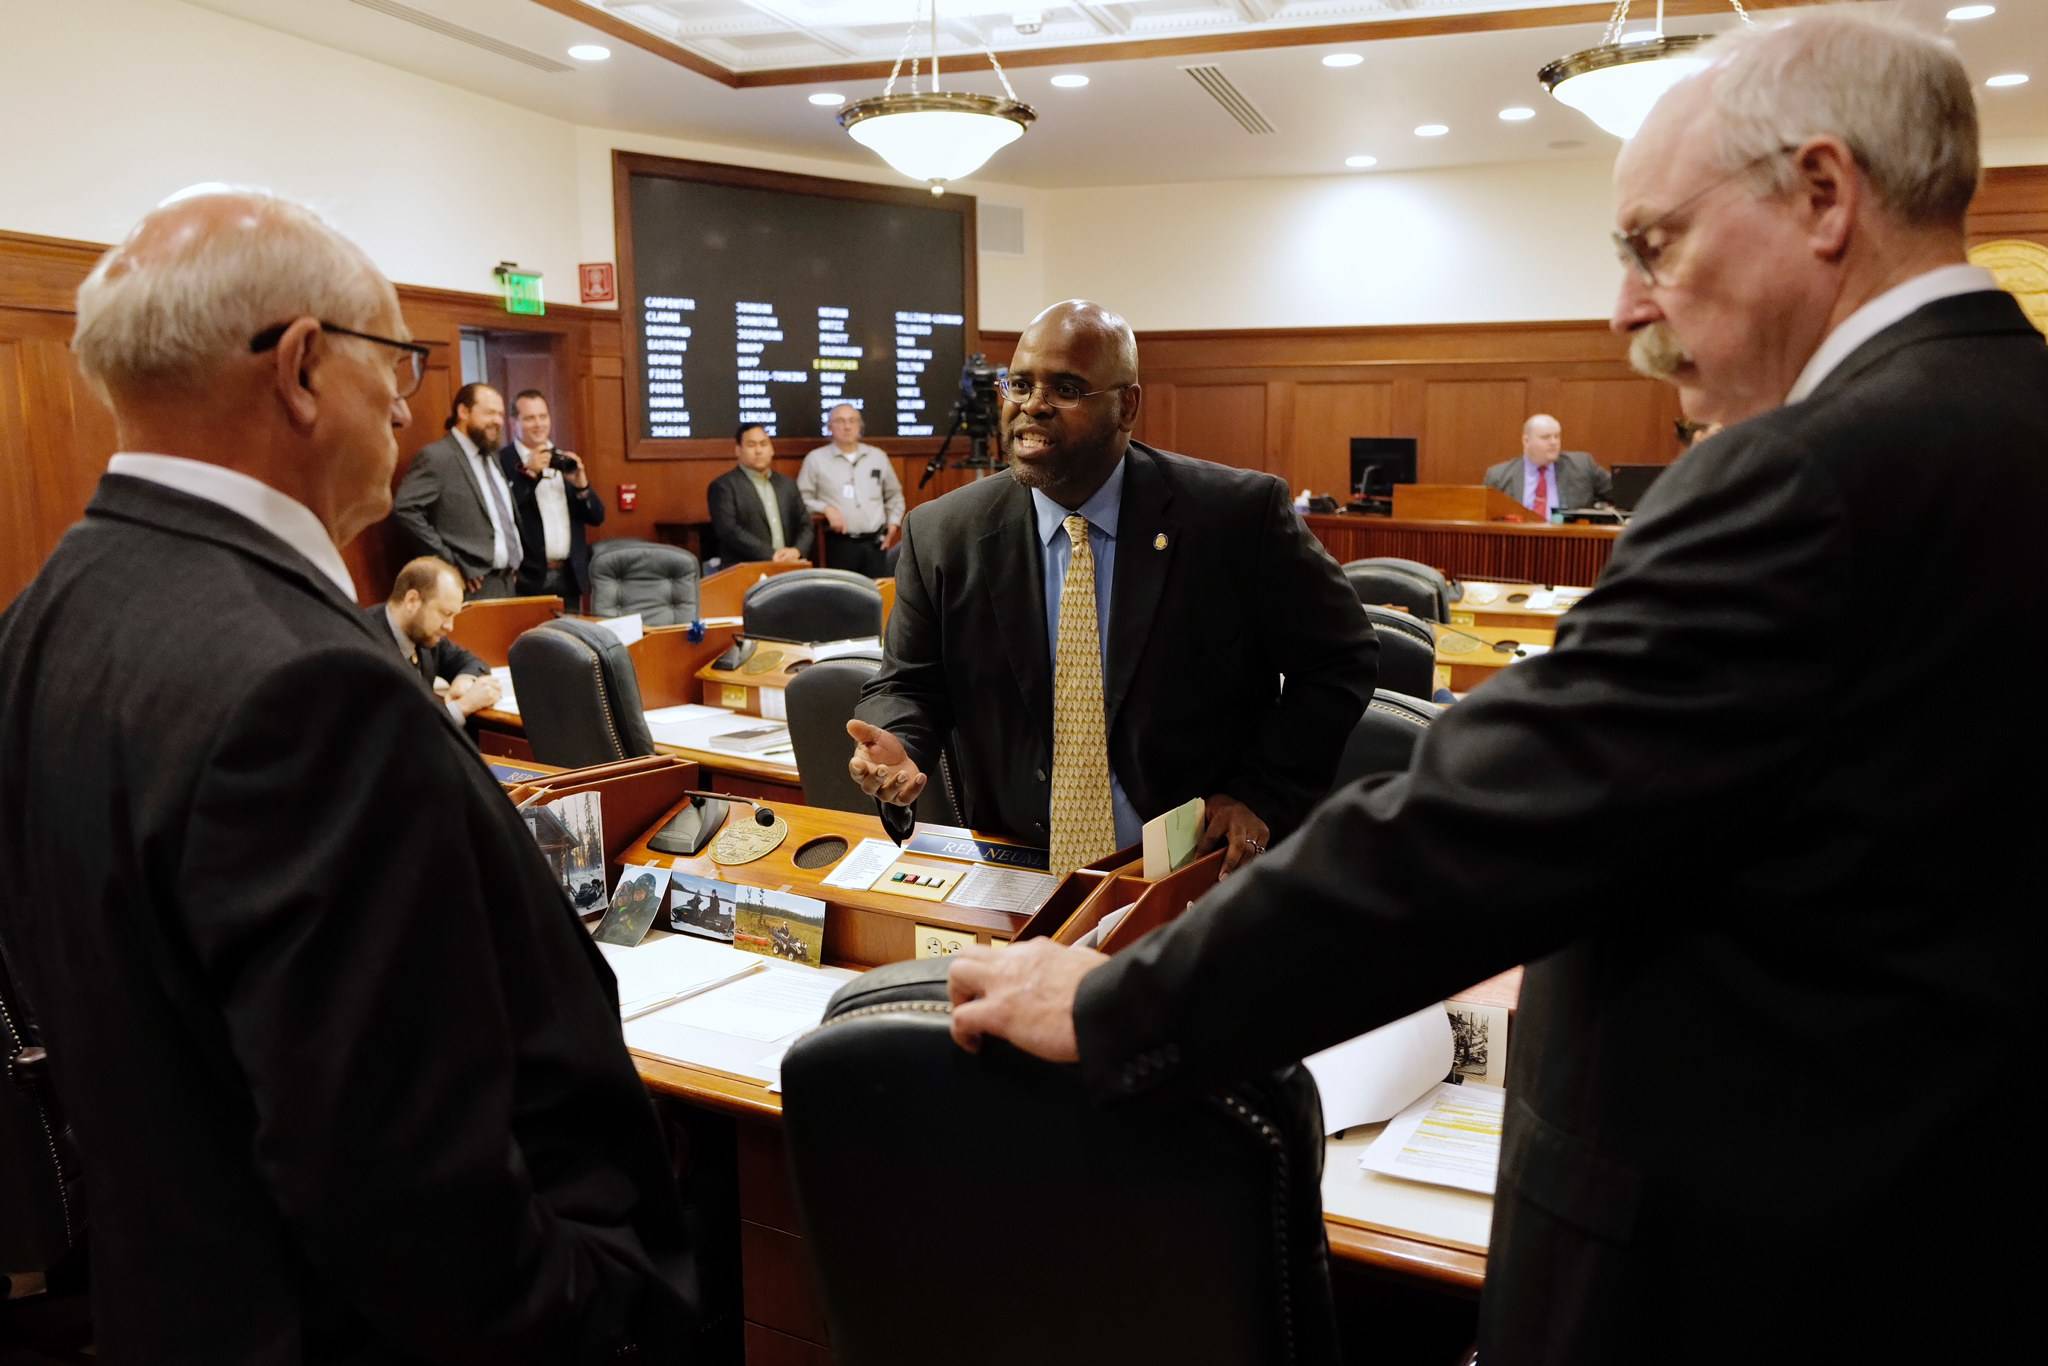 Sen. David Wilson, R-Wasilla, center, has a heated discussion with Sen John Coghill, R-North Pole, left, as Sen. Bert Stedman, R-Sitka, listens as they meet for a continued Joint Session of the Alaska Legislature at the Capitol on Thursday, July 11, 2019. (Michael Penn | Juneau Empire)